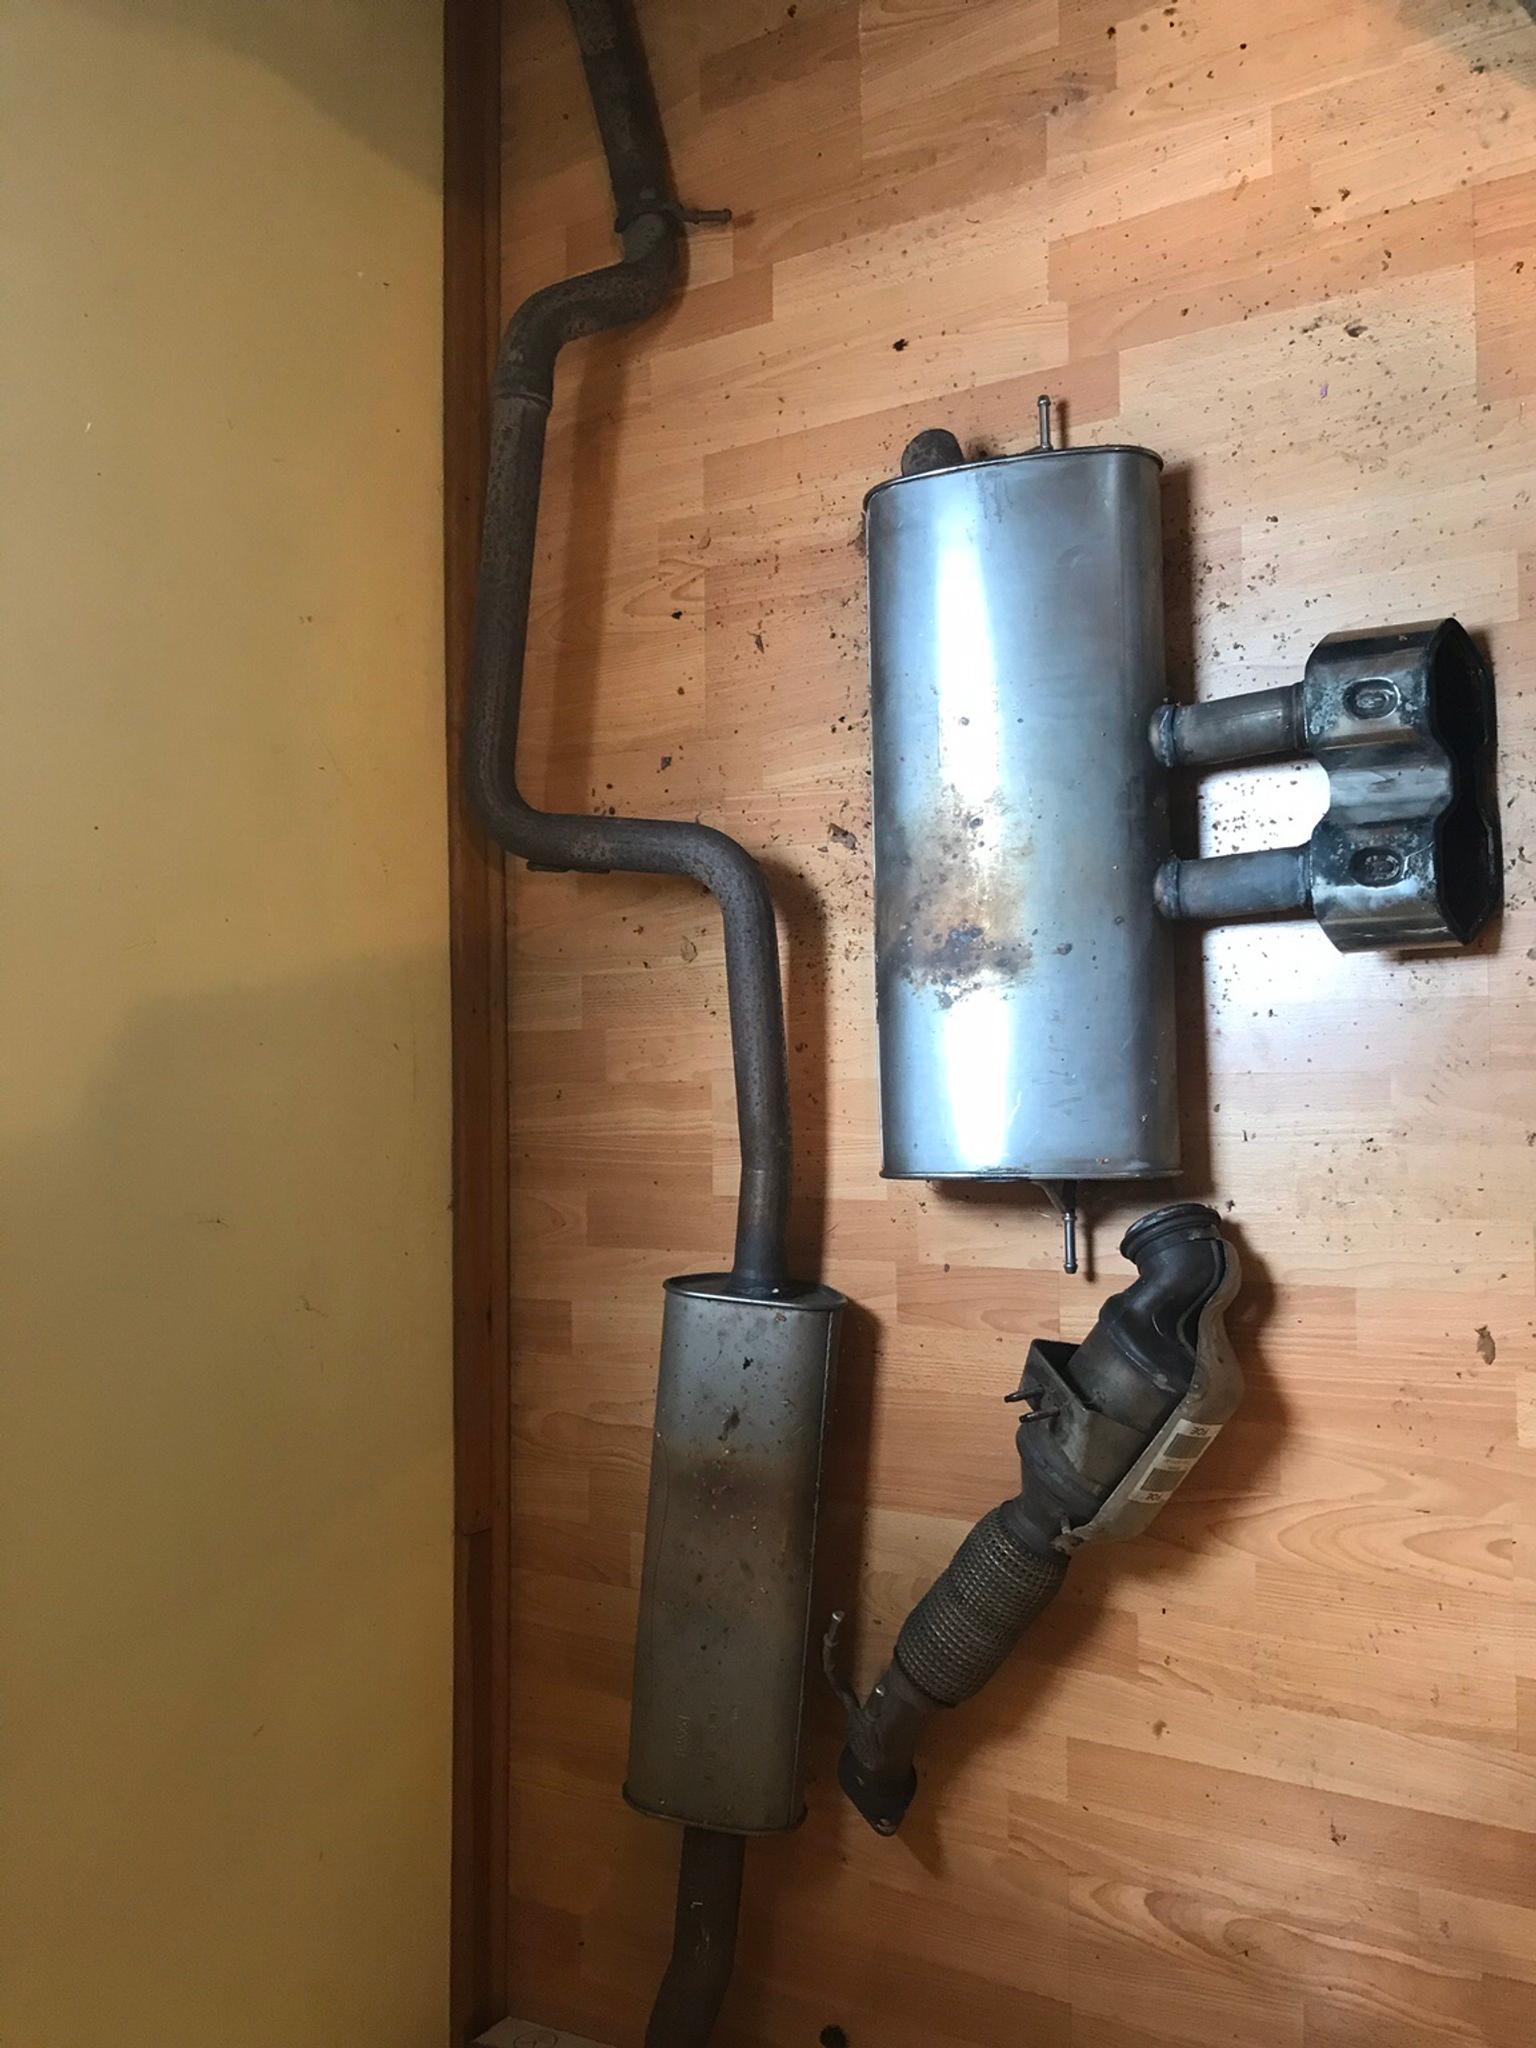 Ford Focus ST Exhaust in DY11 Wyre Forest for £180.00 for sale | Shpock